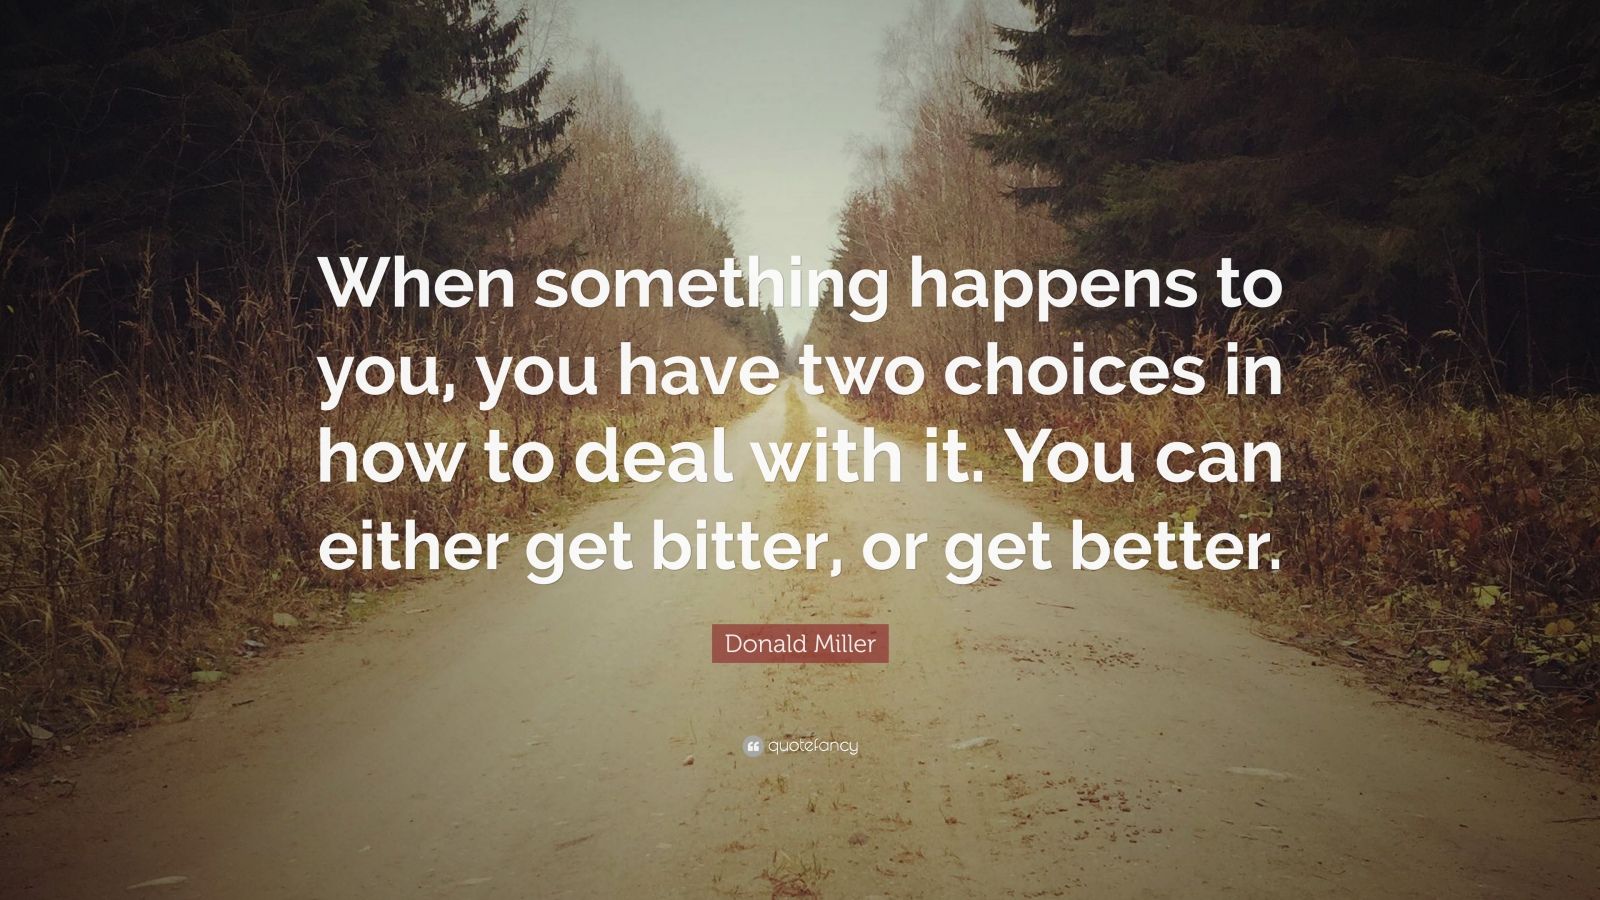 Donald Miller Quote: “When something happens to you, you have two